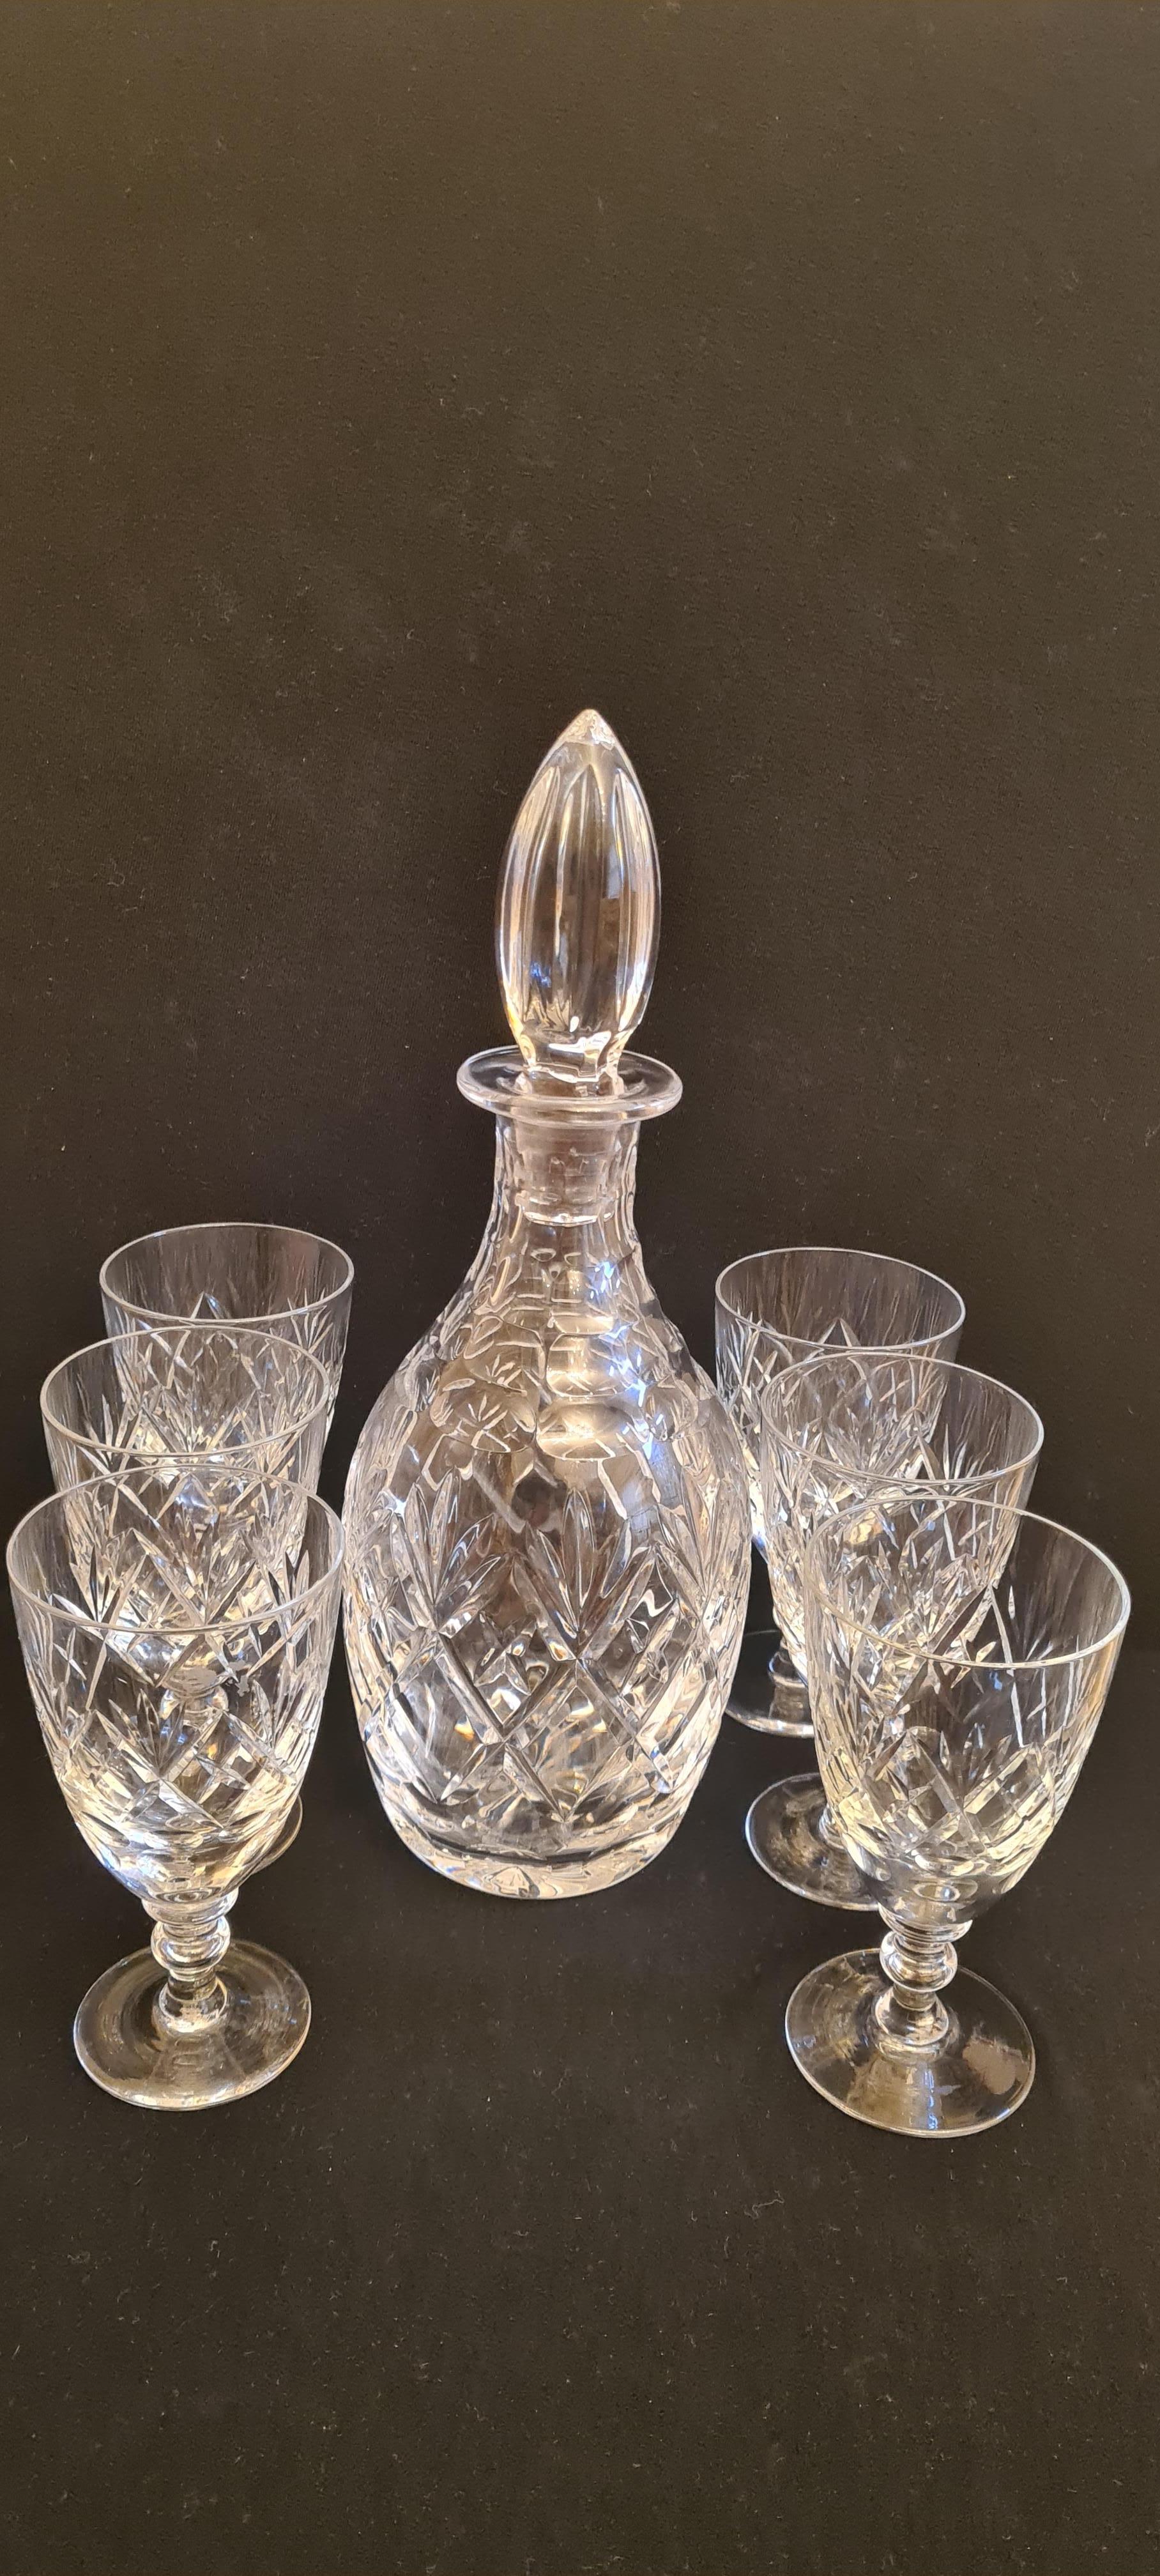 Beautifull vitange Webb Corbett crystal drinking set signed and dated 1961 unused, tored in the cabinet brilliant condition. the decanter have 30 cm tall and 12 cm width nd 6 glasses have 13 cm tall and 7 cm width.